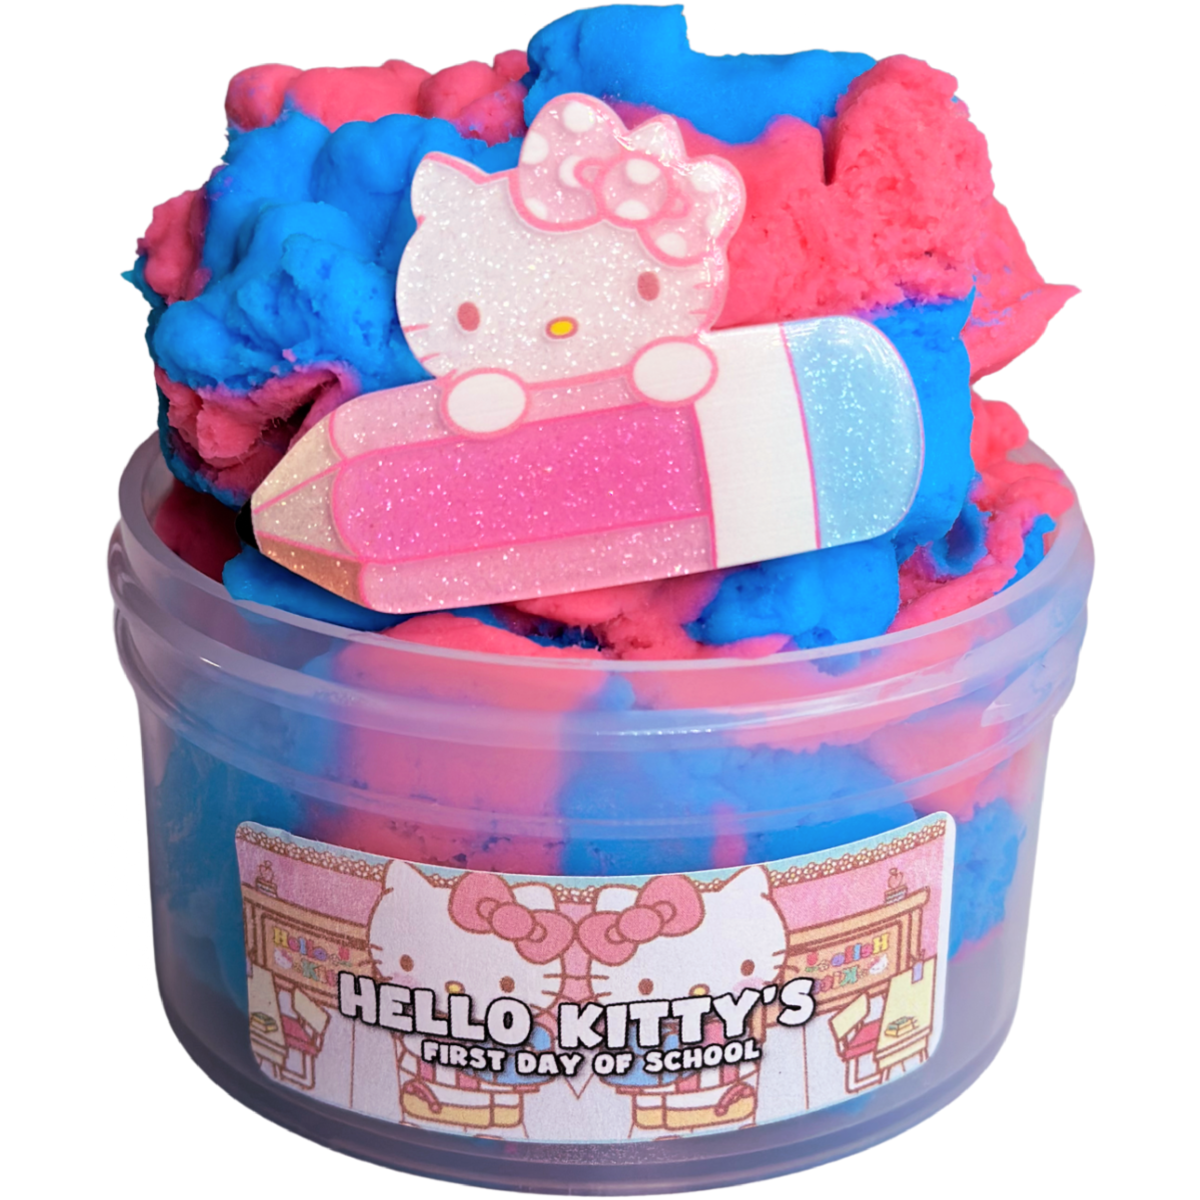 Hello Kitty's First Day of School Cloud Slime